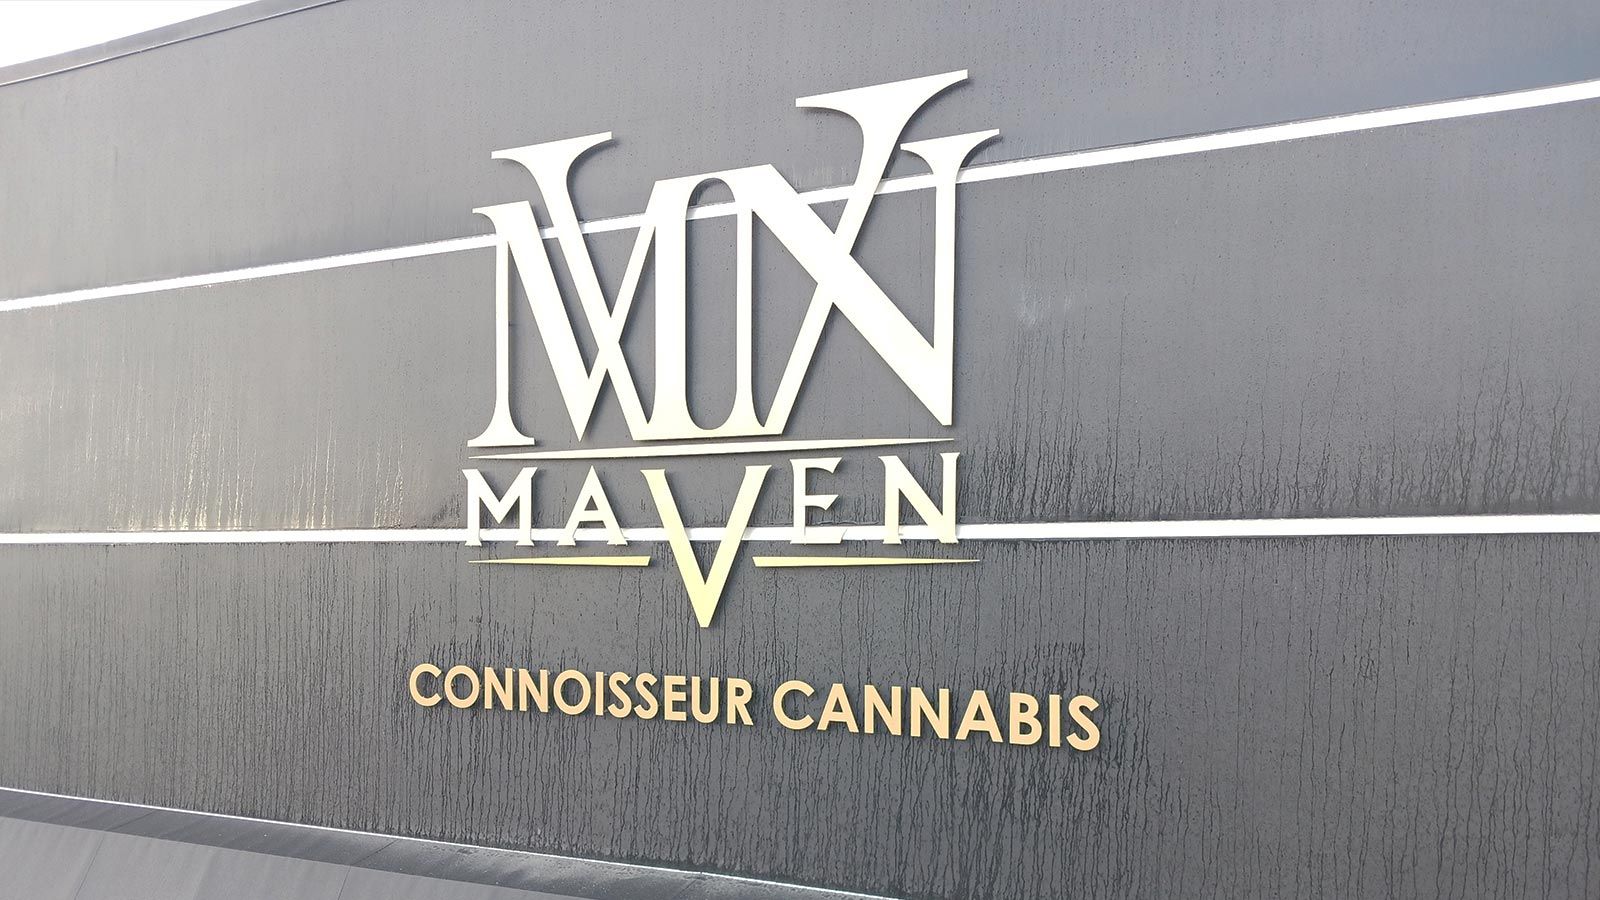 The Maven Store logo sign fixed to the exterior wall